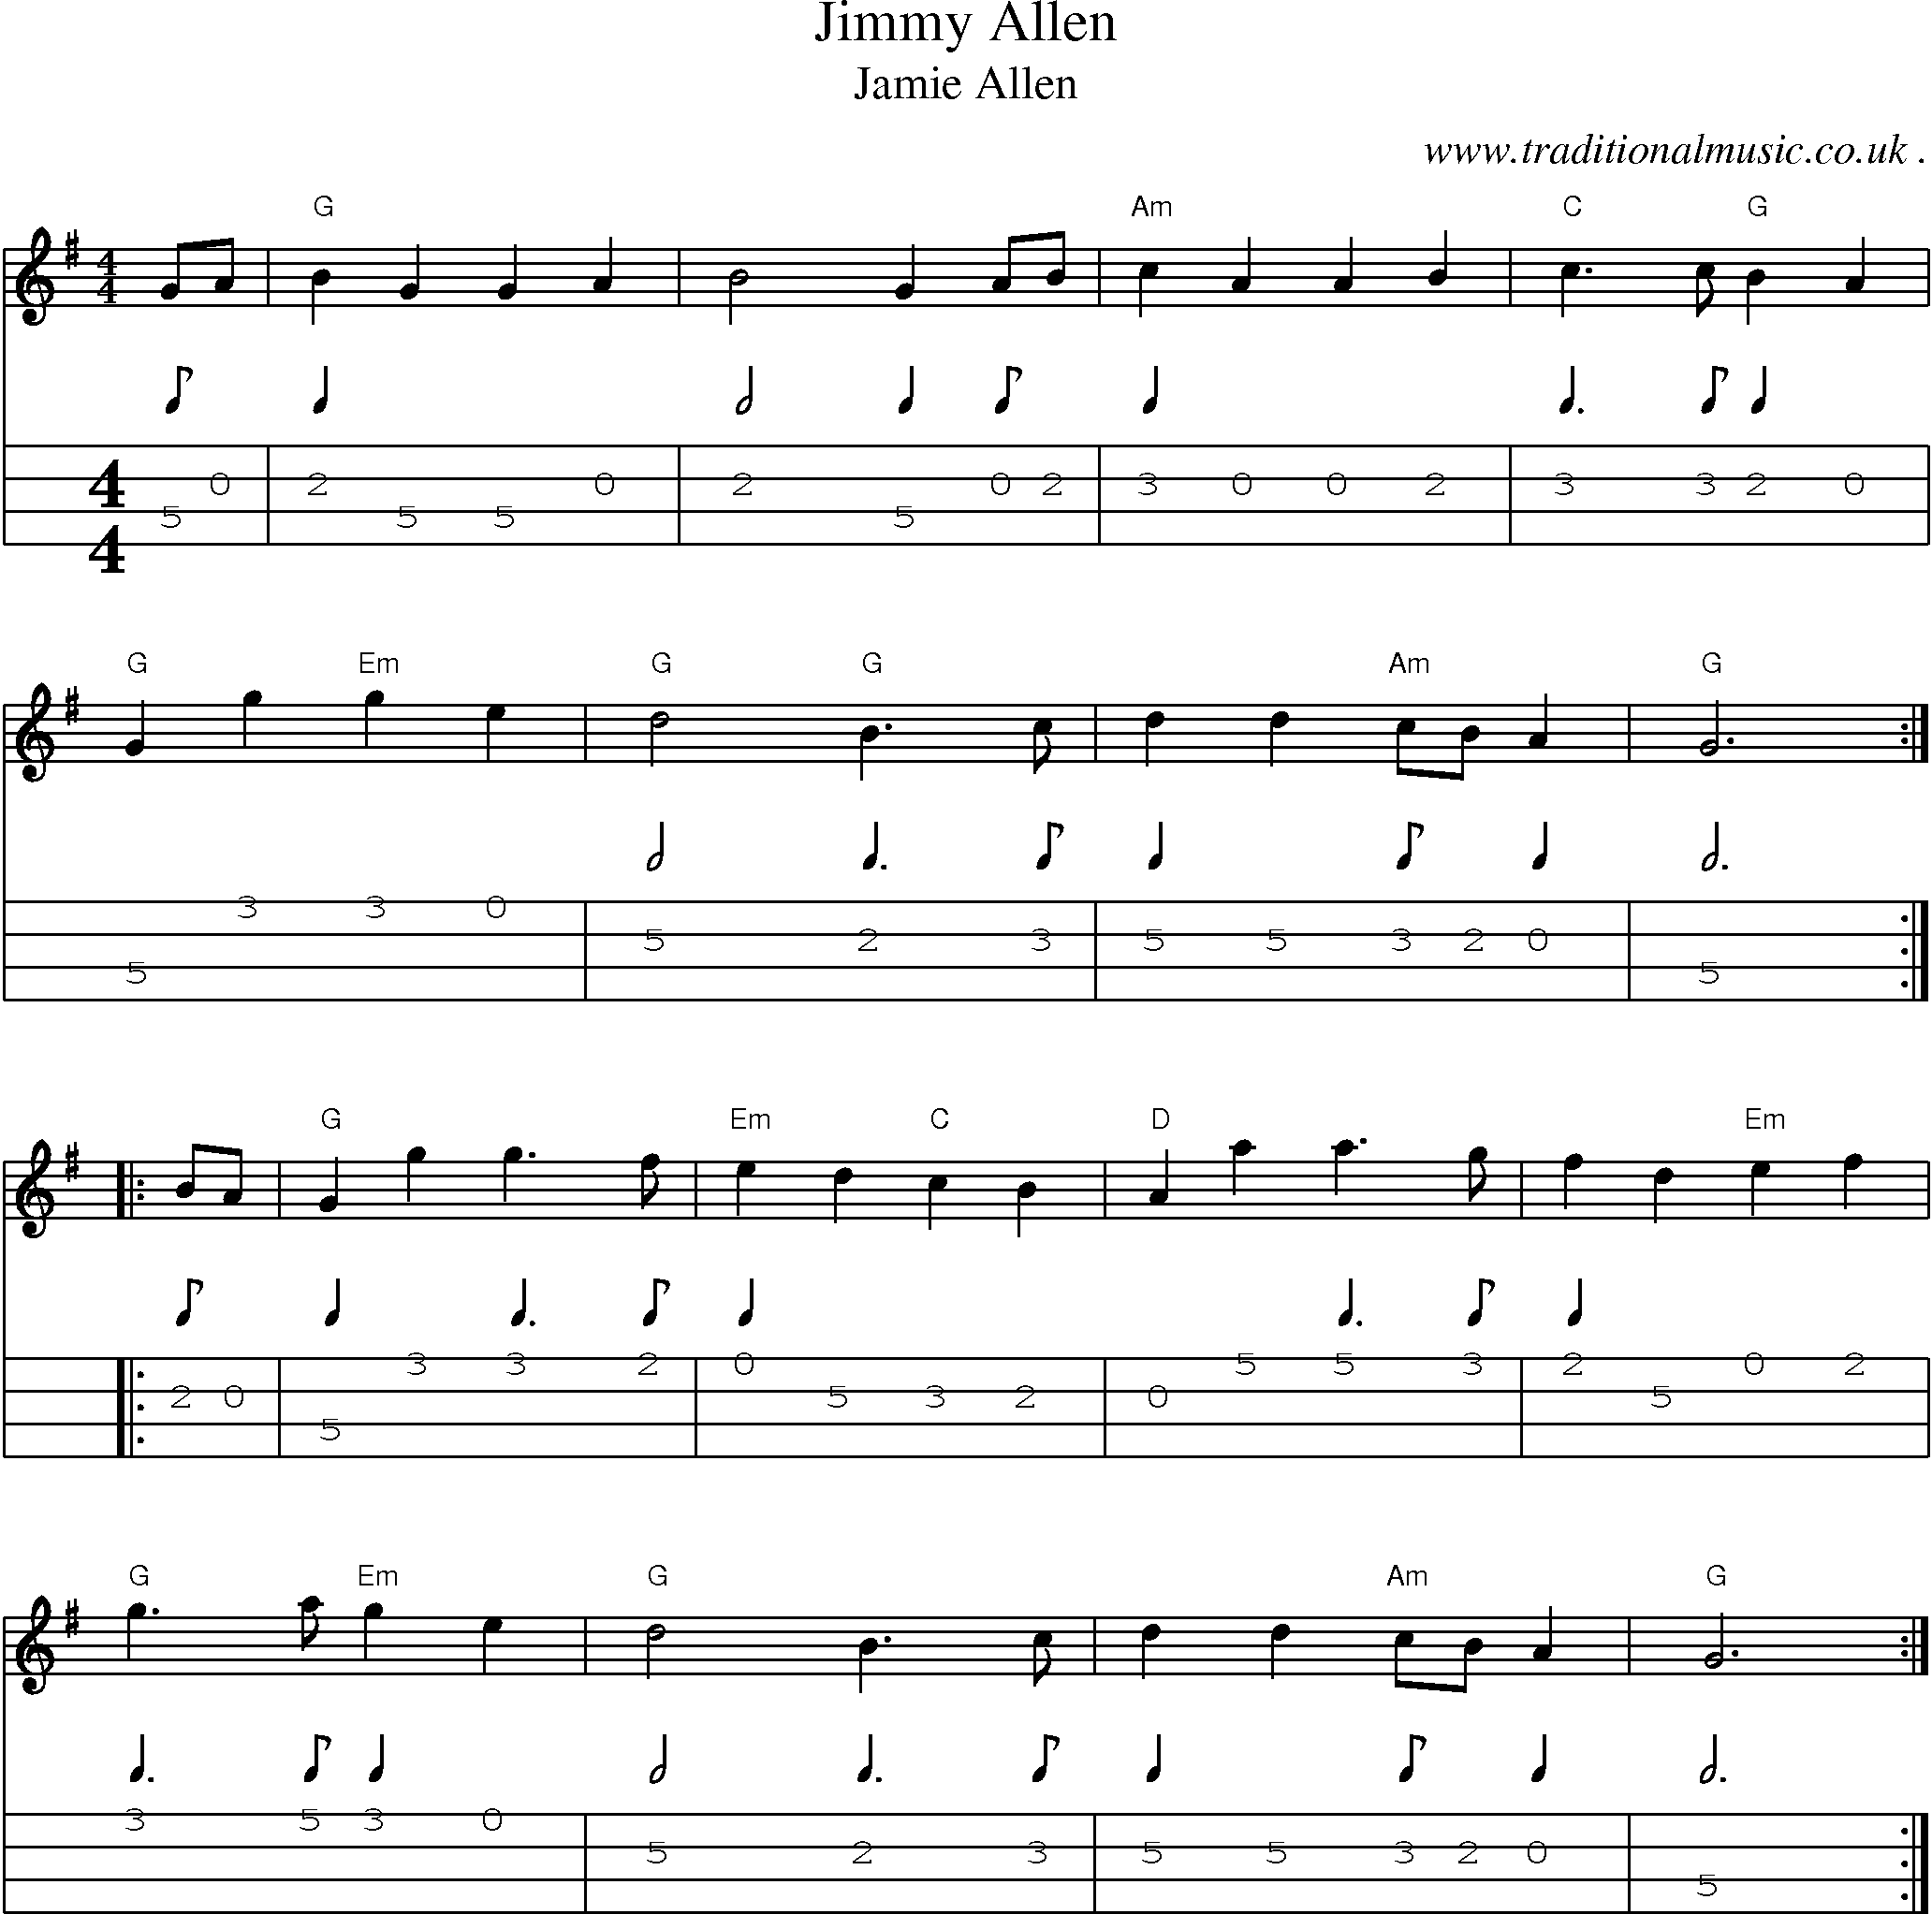 Music Score and Guitar Tabs for Jimmy Allen